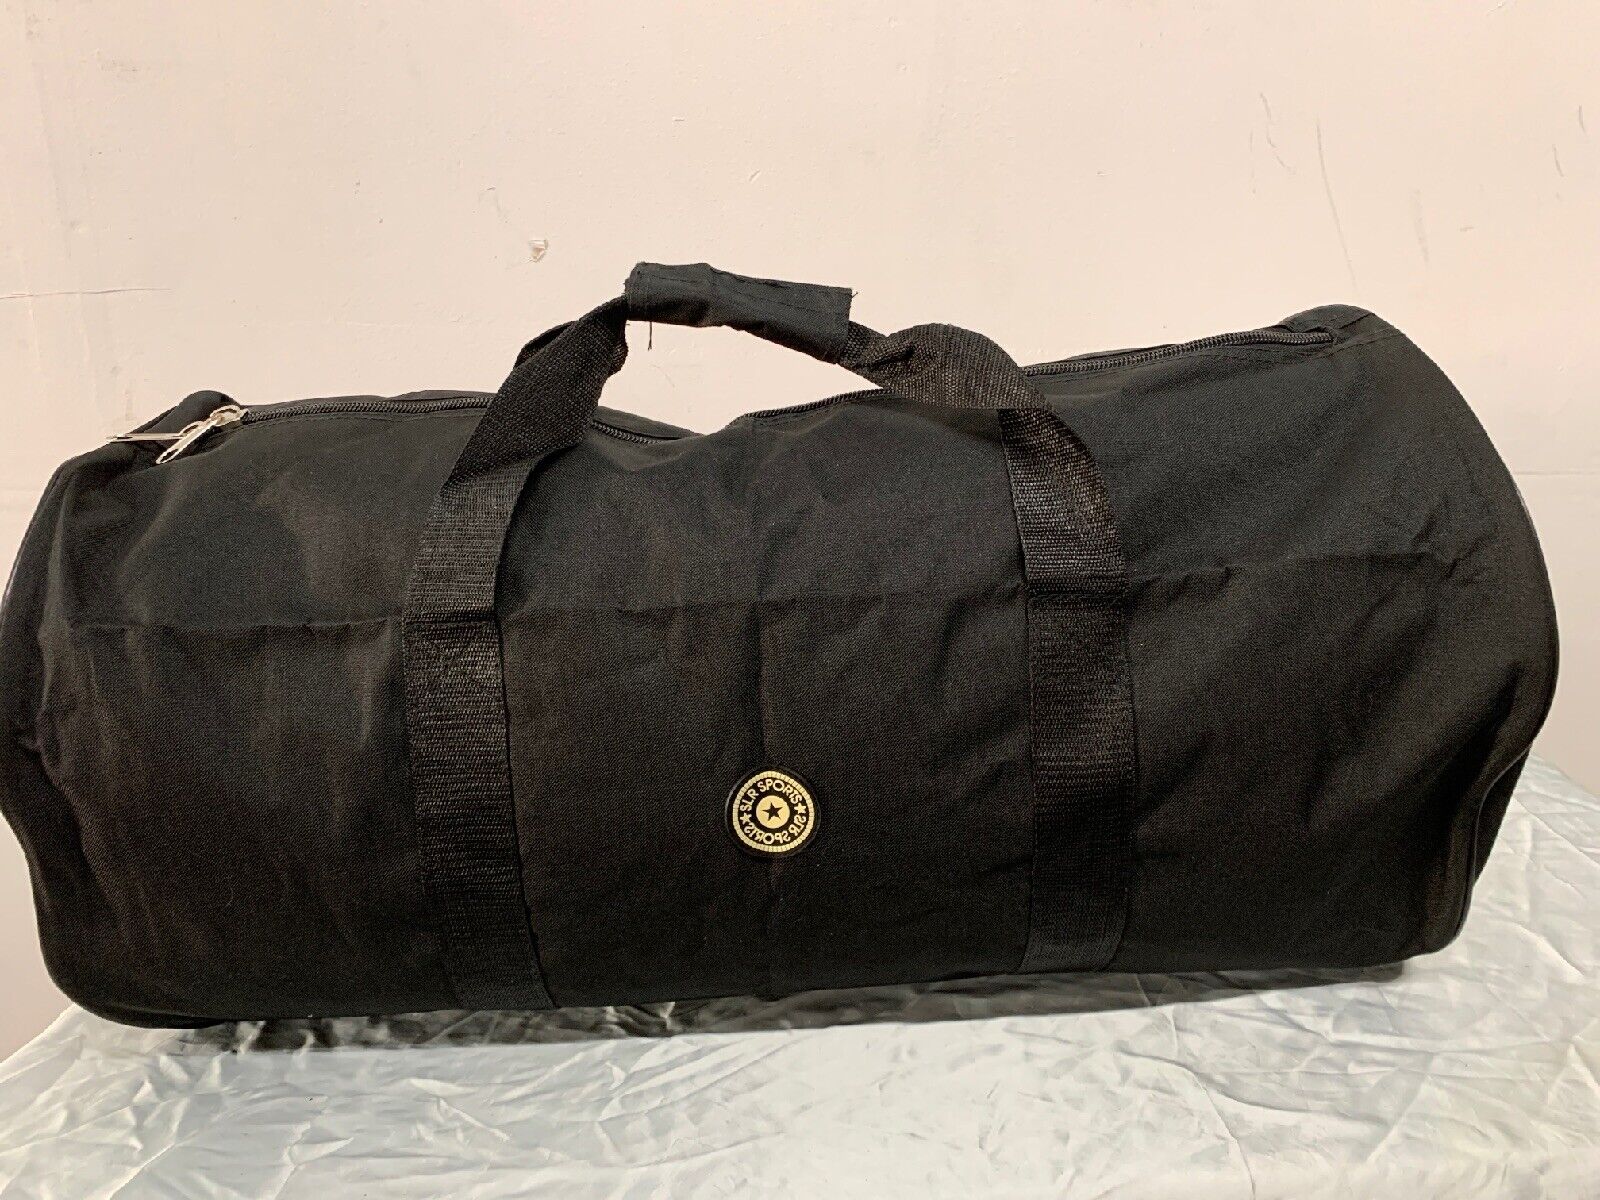 Extra Large Packable Duffle Bag Travel Gym Sport Duffle Bag Canvas Size 30”